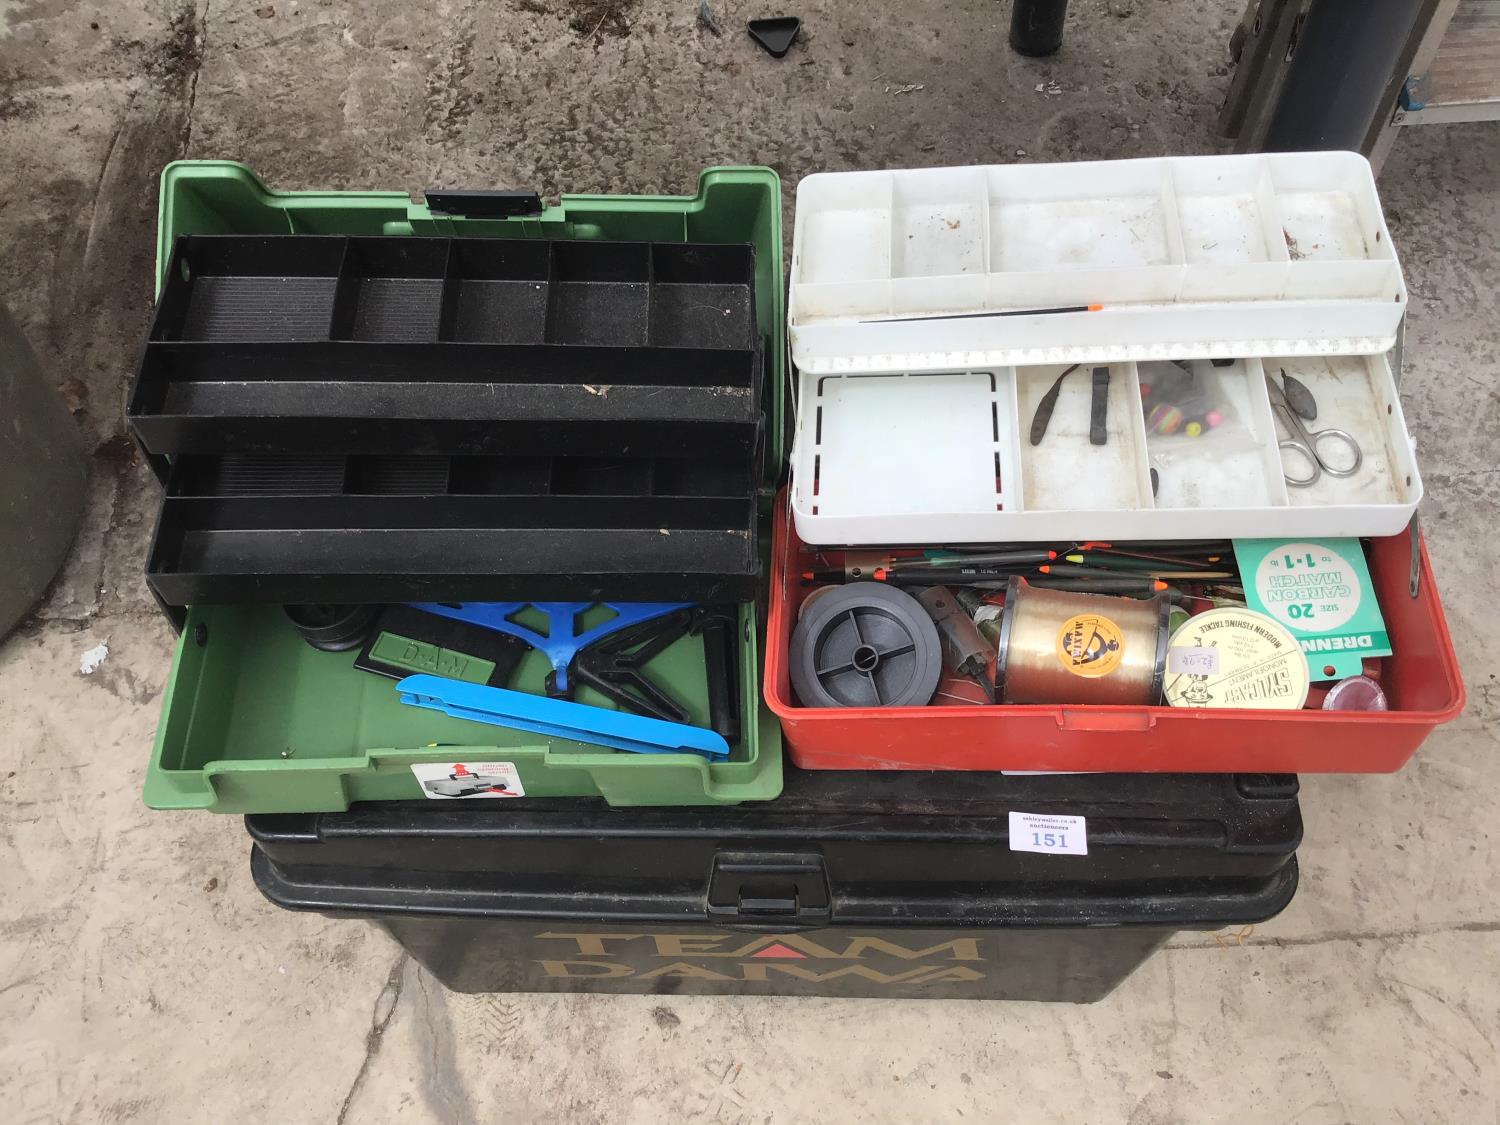 A LARGE TEAM DAIWA FISHING TACKLE BOX WITH TWO SMALL BOXES AND CONTENTS